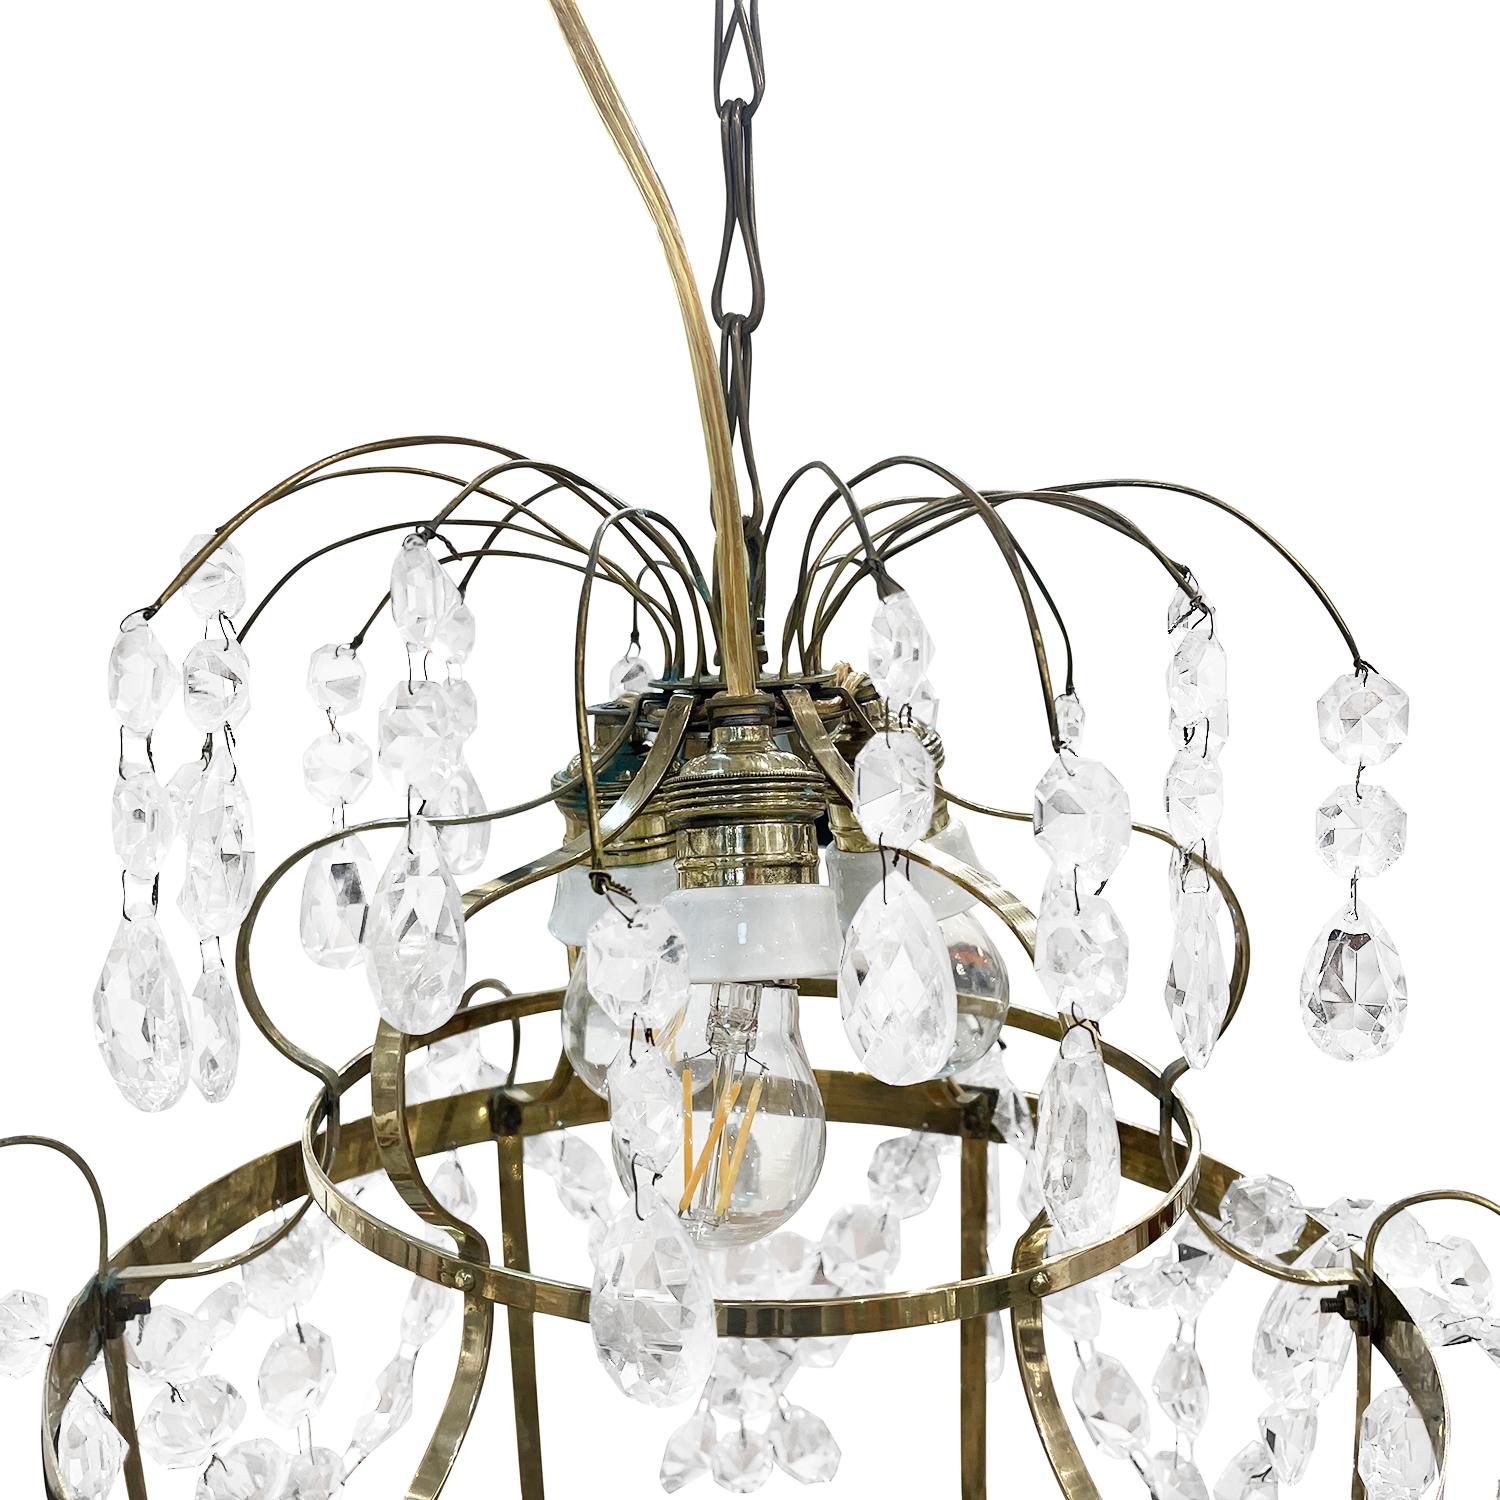 19th Century French Antique Empire Crystal Glass Chandelier, Parisian Candelabra In Good Condition For Sale In West Palm Beach, FL